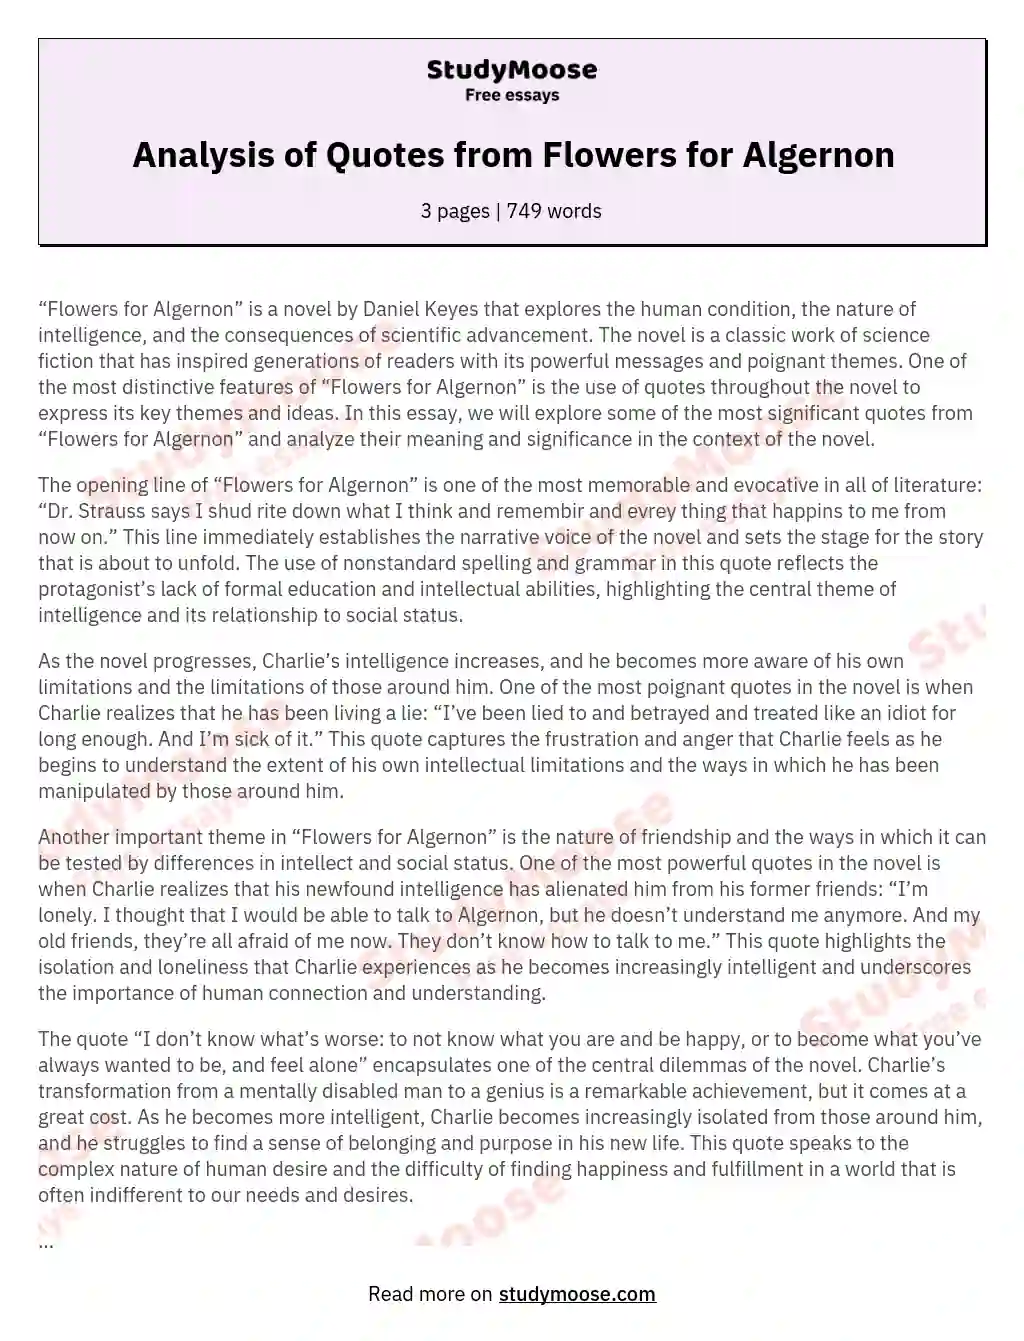 Analysis of Quotes from Flowers for Algernon essay